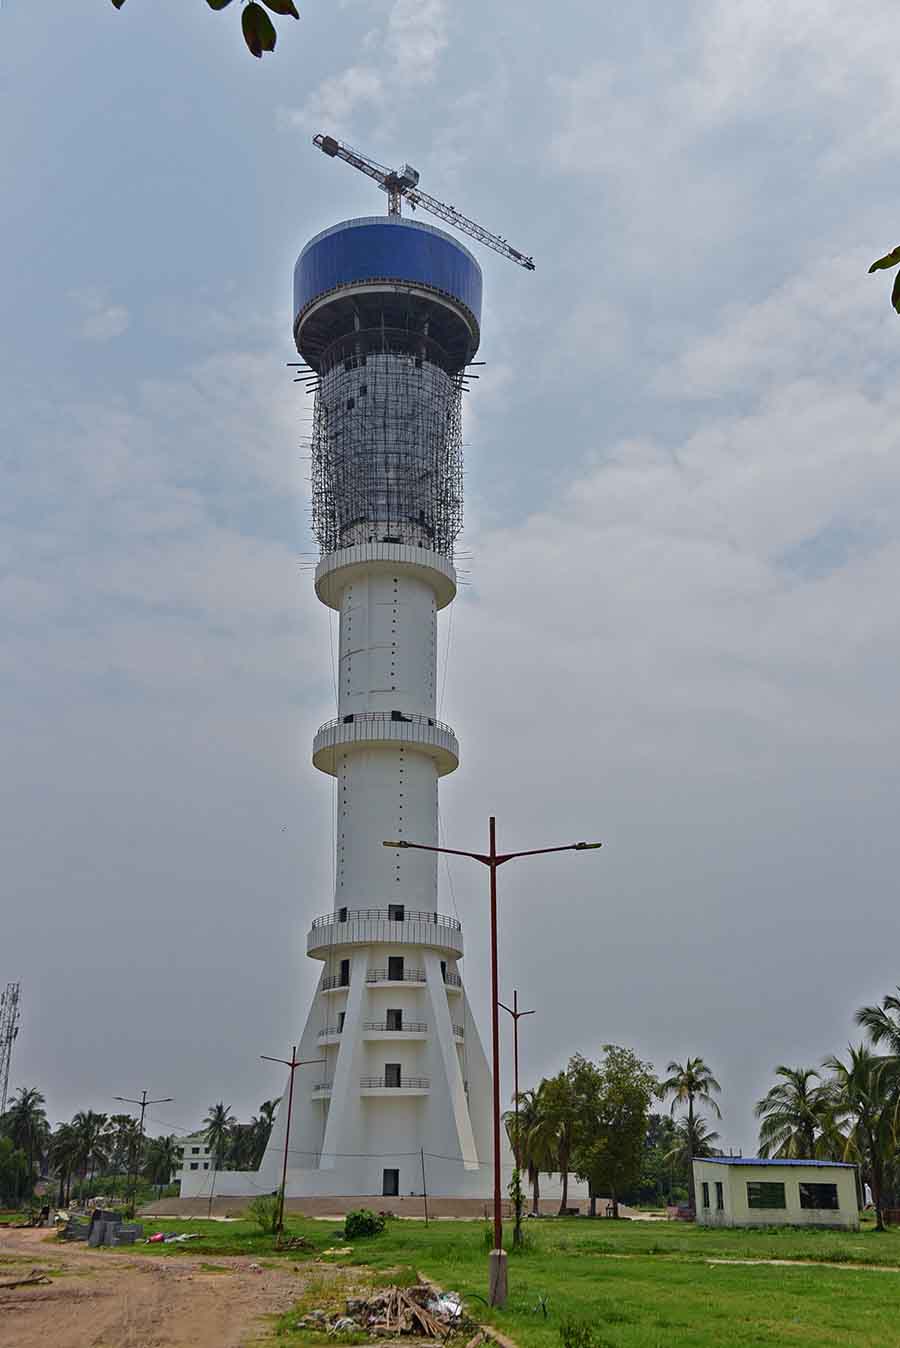 Tourists and holidaymakers will get a splendid aerial view from this 400-feet-high Panchdeep Tower in Howrah (Belilious Park) which is set for inauguration. Two high speed elevators have been installed inside the tower to ferry people to the top